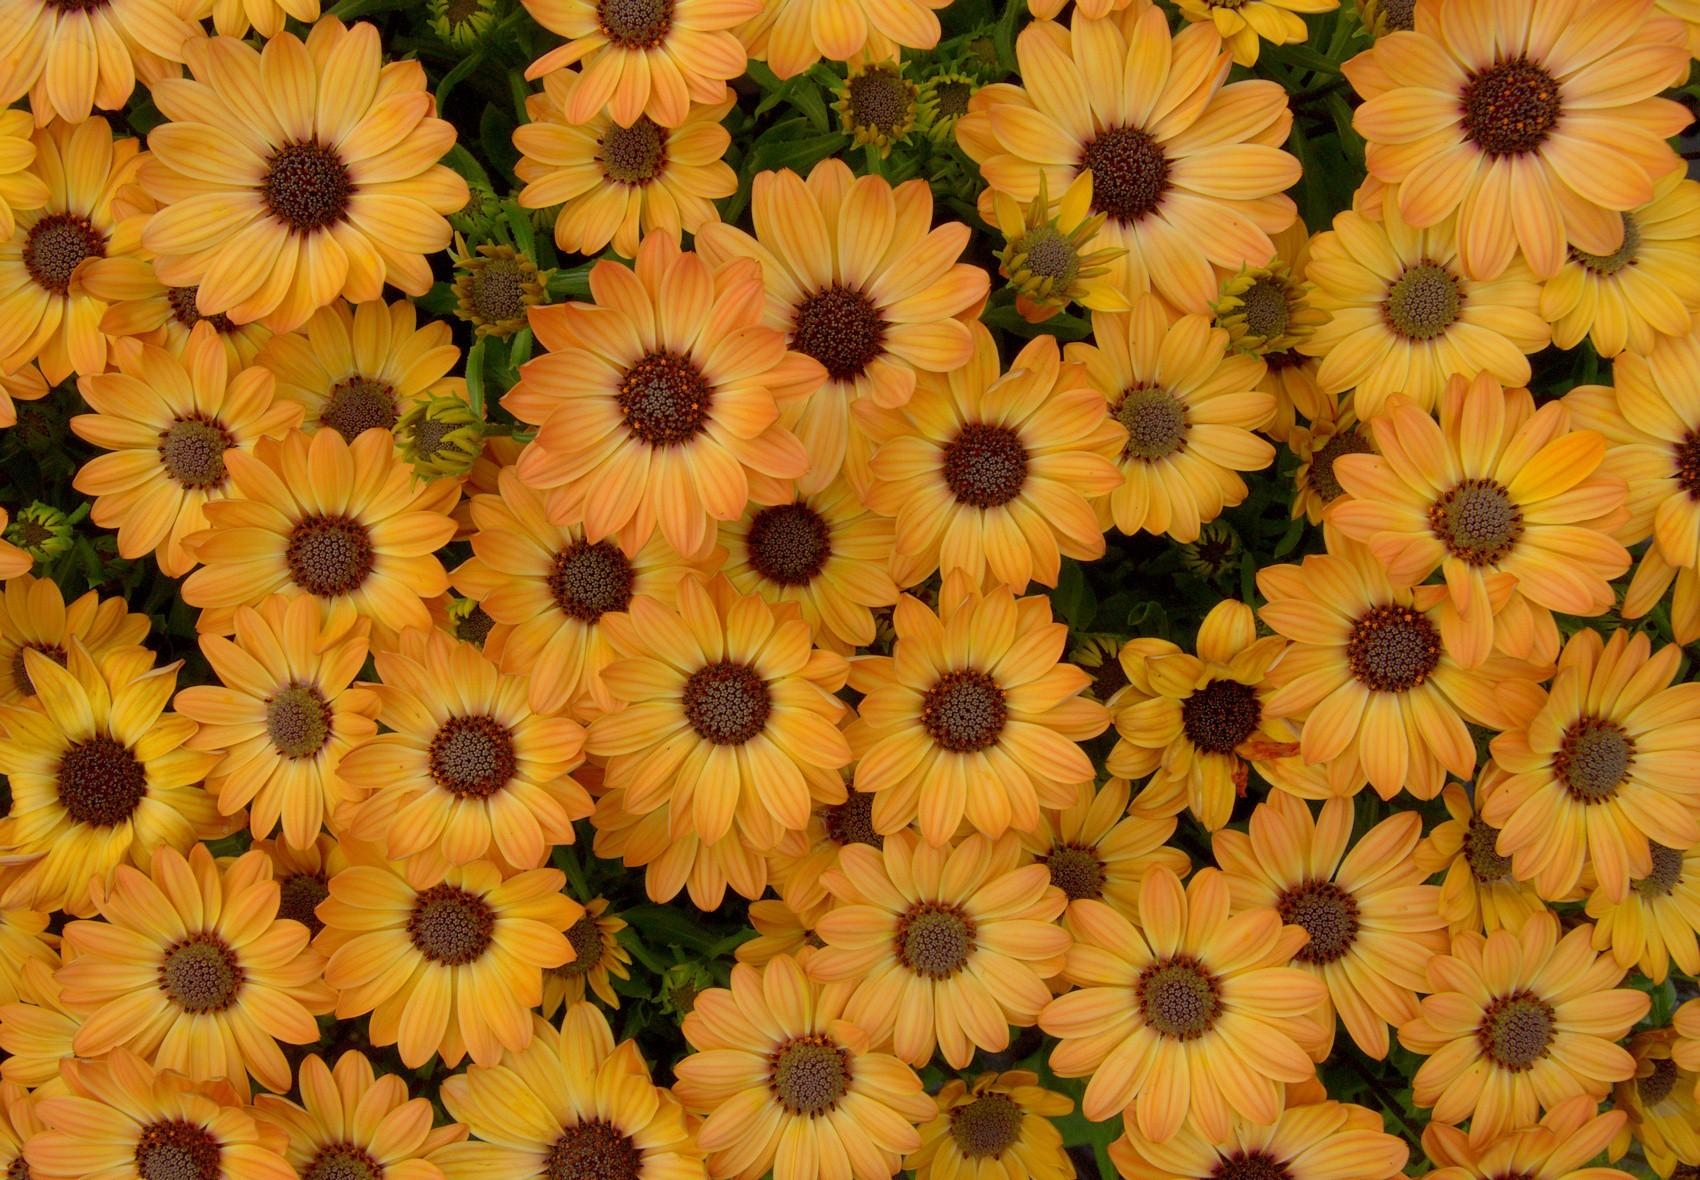 petals, flowers, yellow, flower bed, flowerbed, dimorfoteka, dimorphotheque wallpapers for tablet